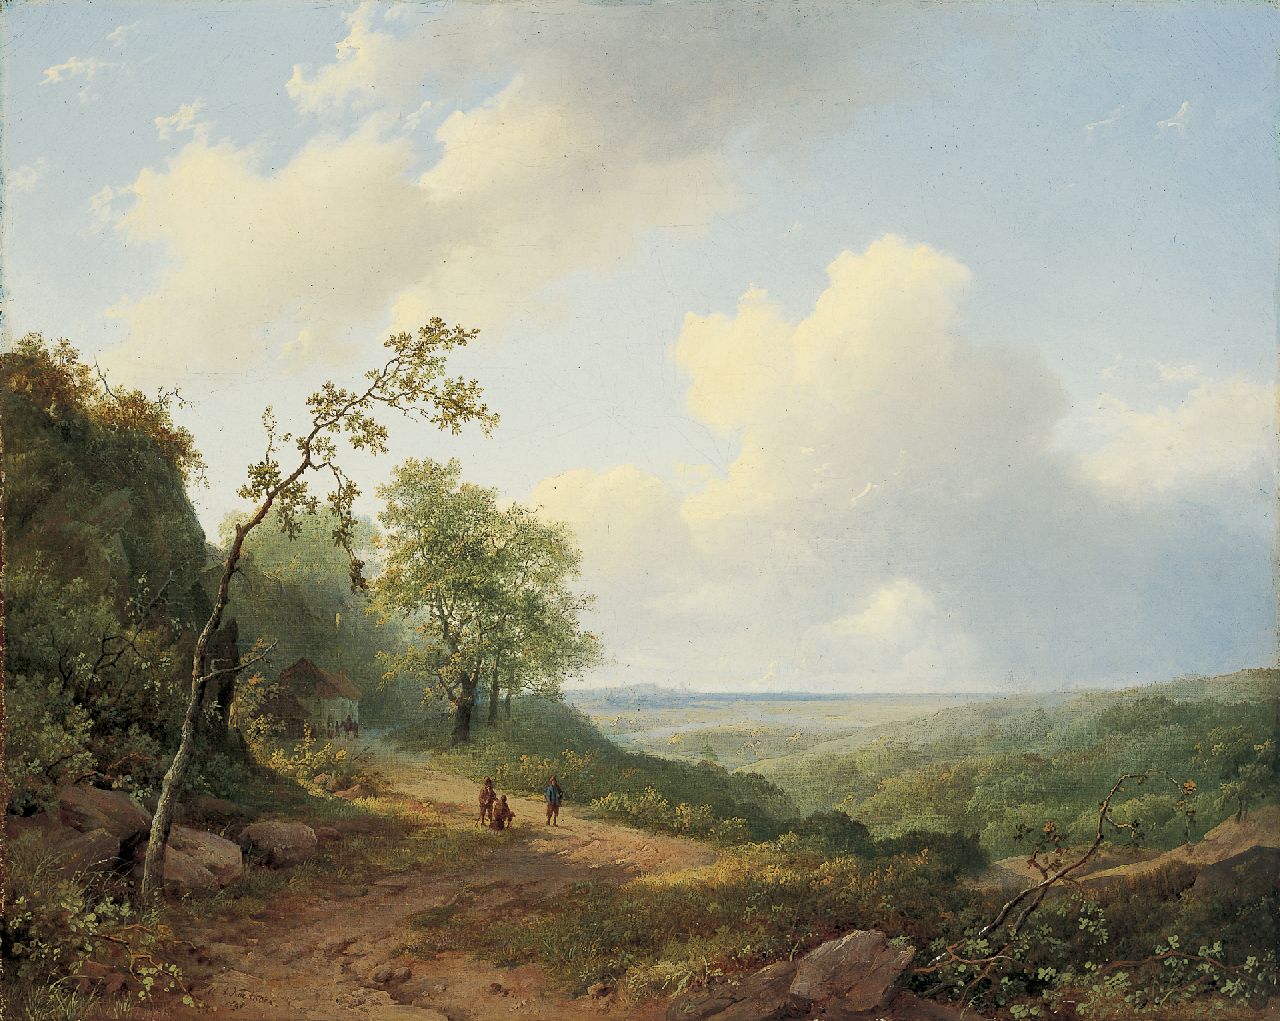 Koekkoek I M.A.  | Marinus Adrianus Koekkoek I, A hilly landscape in summer, oil on canvas 41.5 x 51.7 cm, signed l.l. and dated 1848